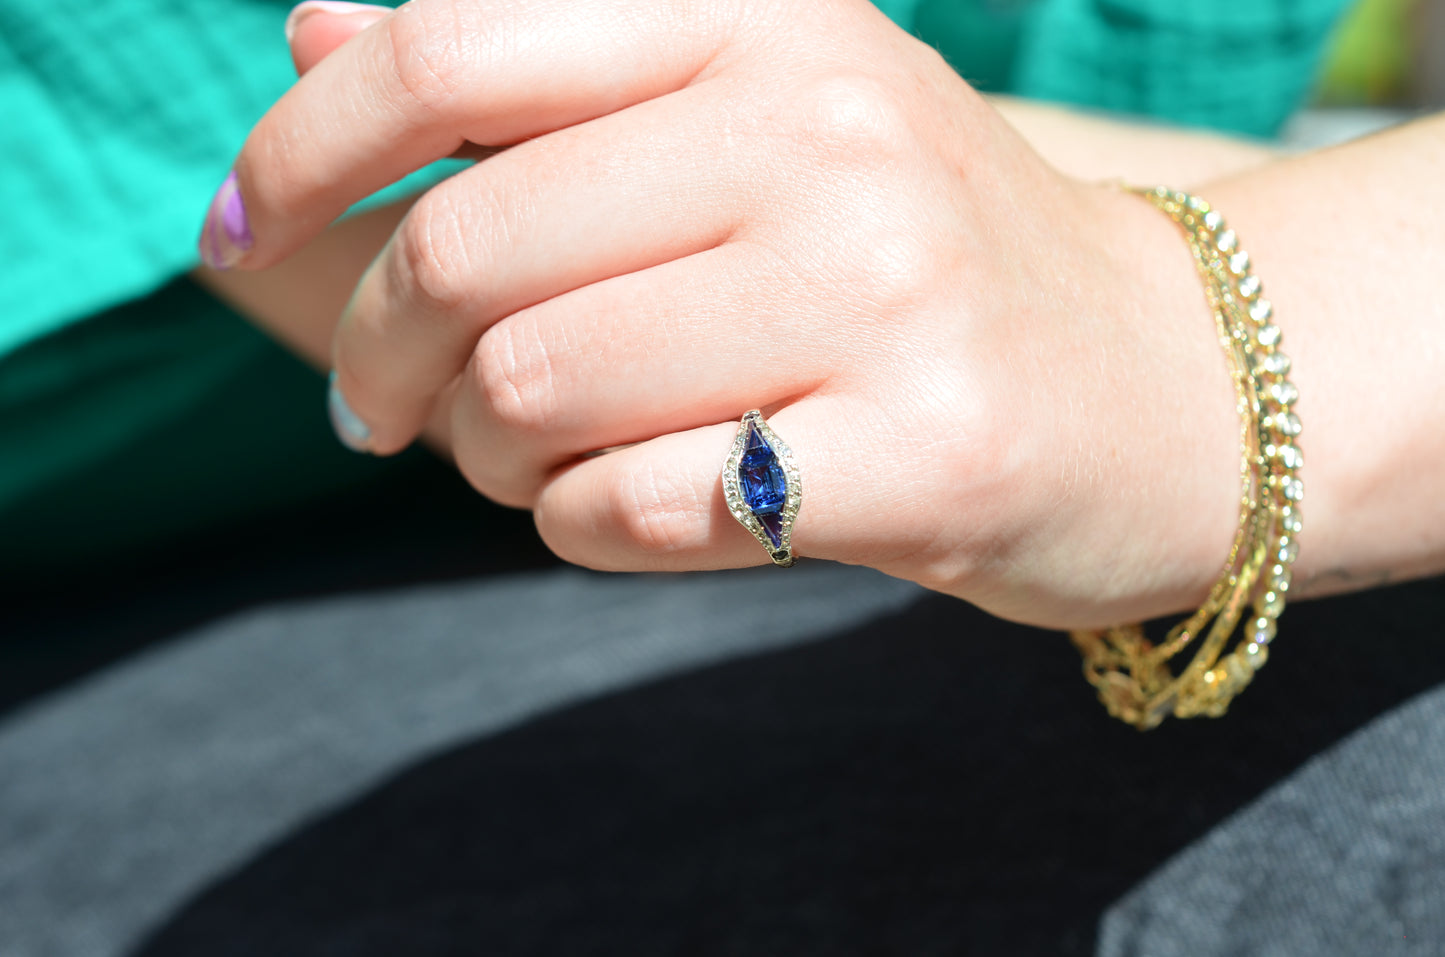 A medium-close view of the ring, vibrant in bright daylight, on the left pinky finger of a Caucasian model. The model has bright multicolored nails, a teal shirt and black jeans, and several gold bracelets.